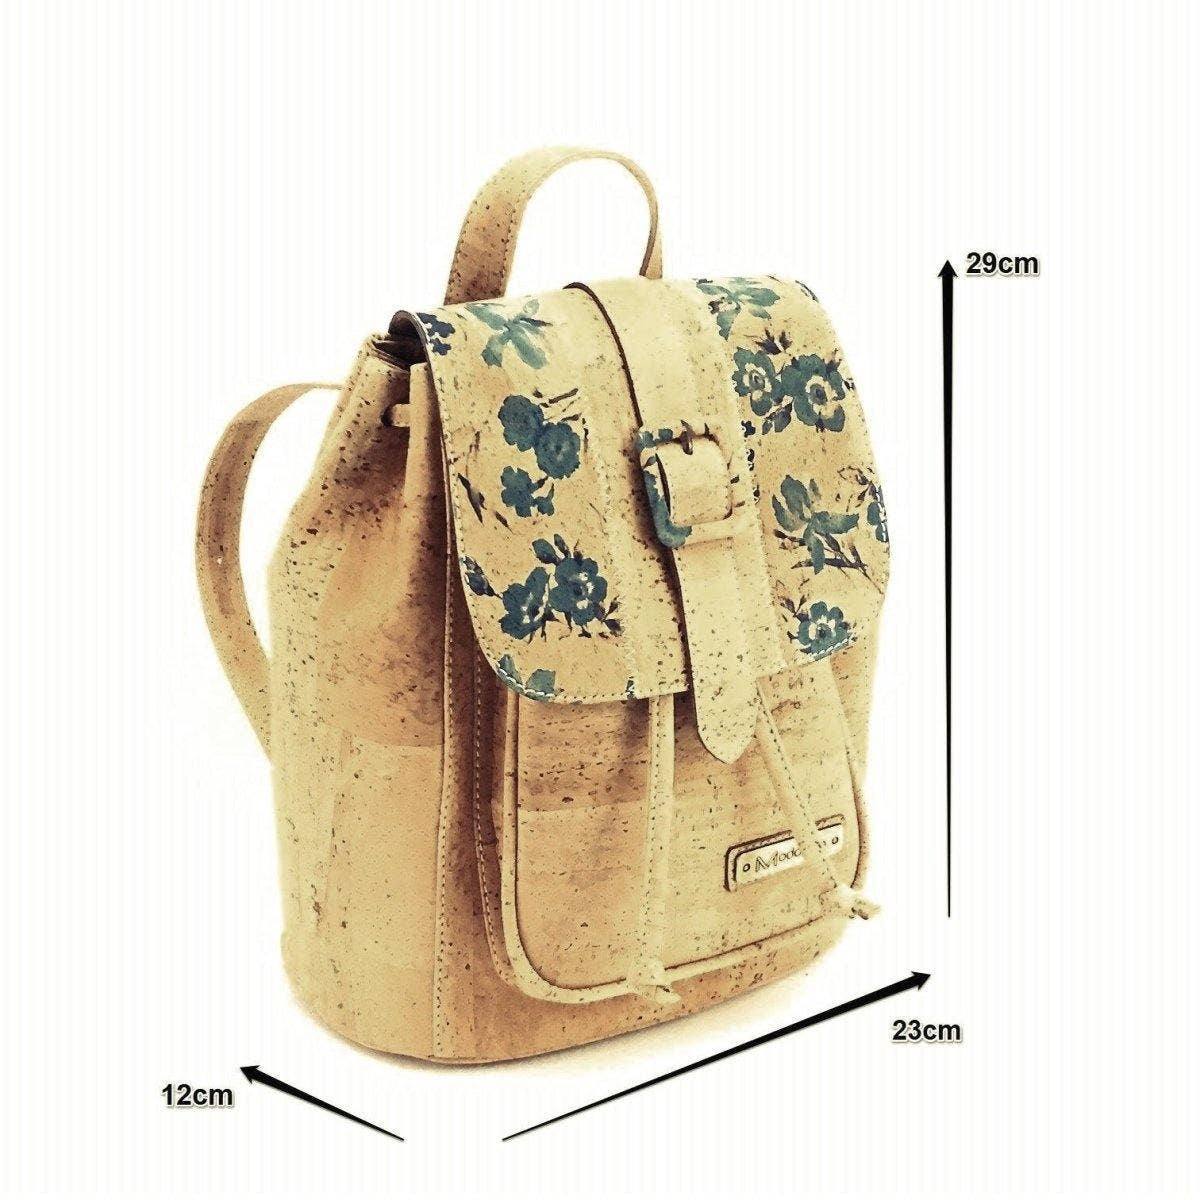 Cork Backpack and Vegan Small Backpack in Blue Floral